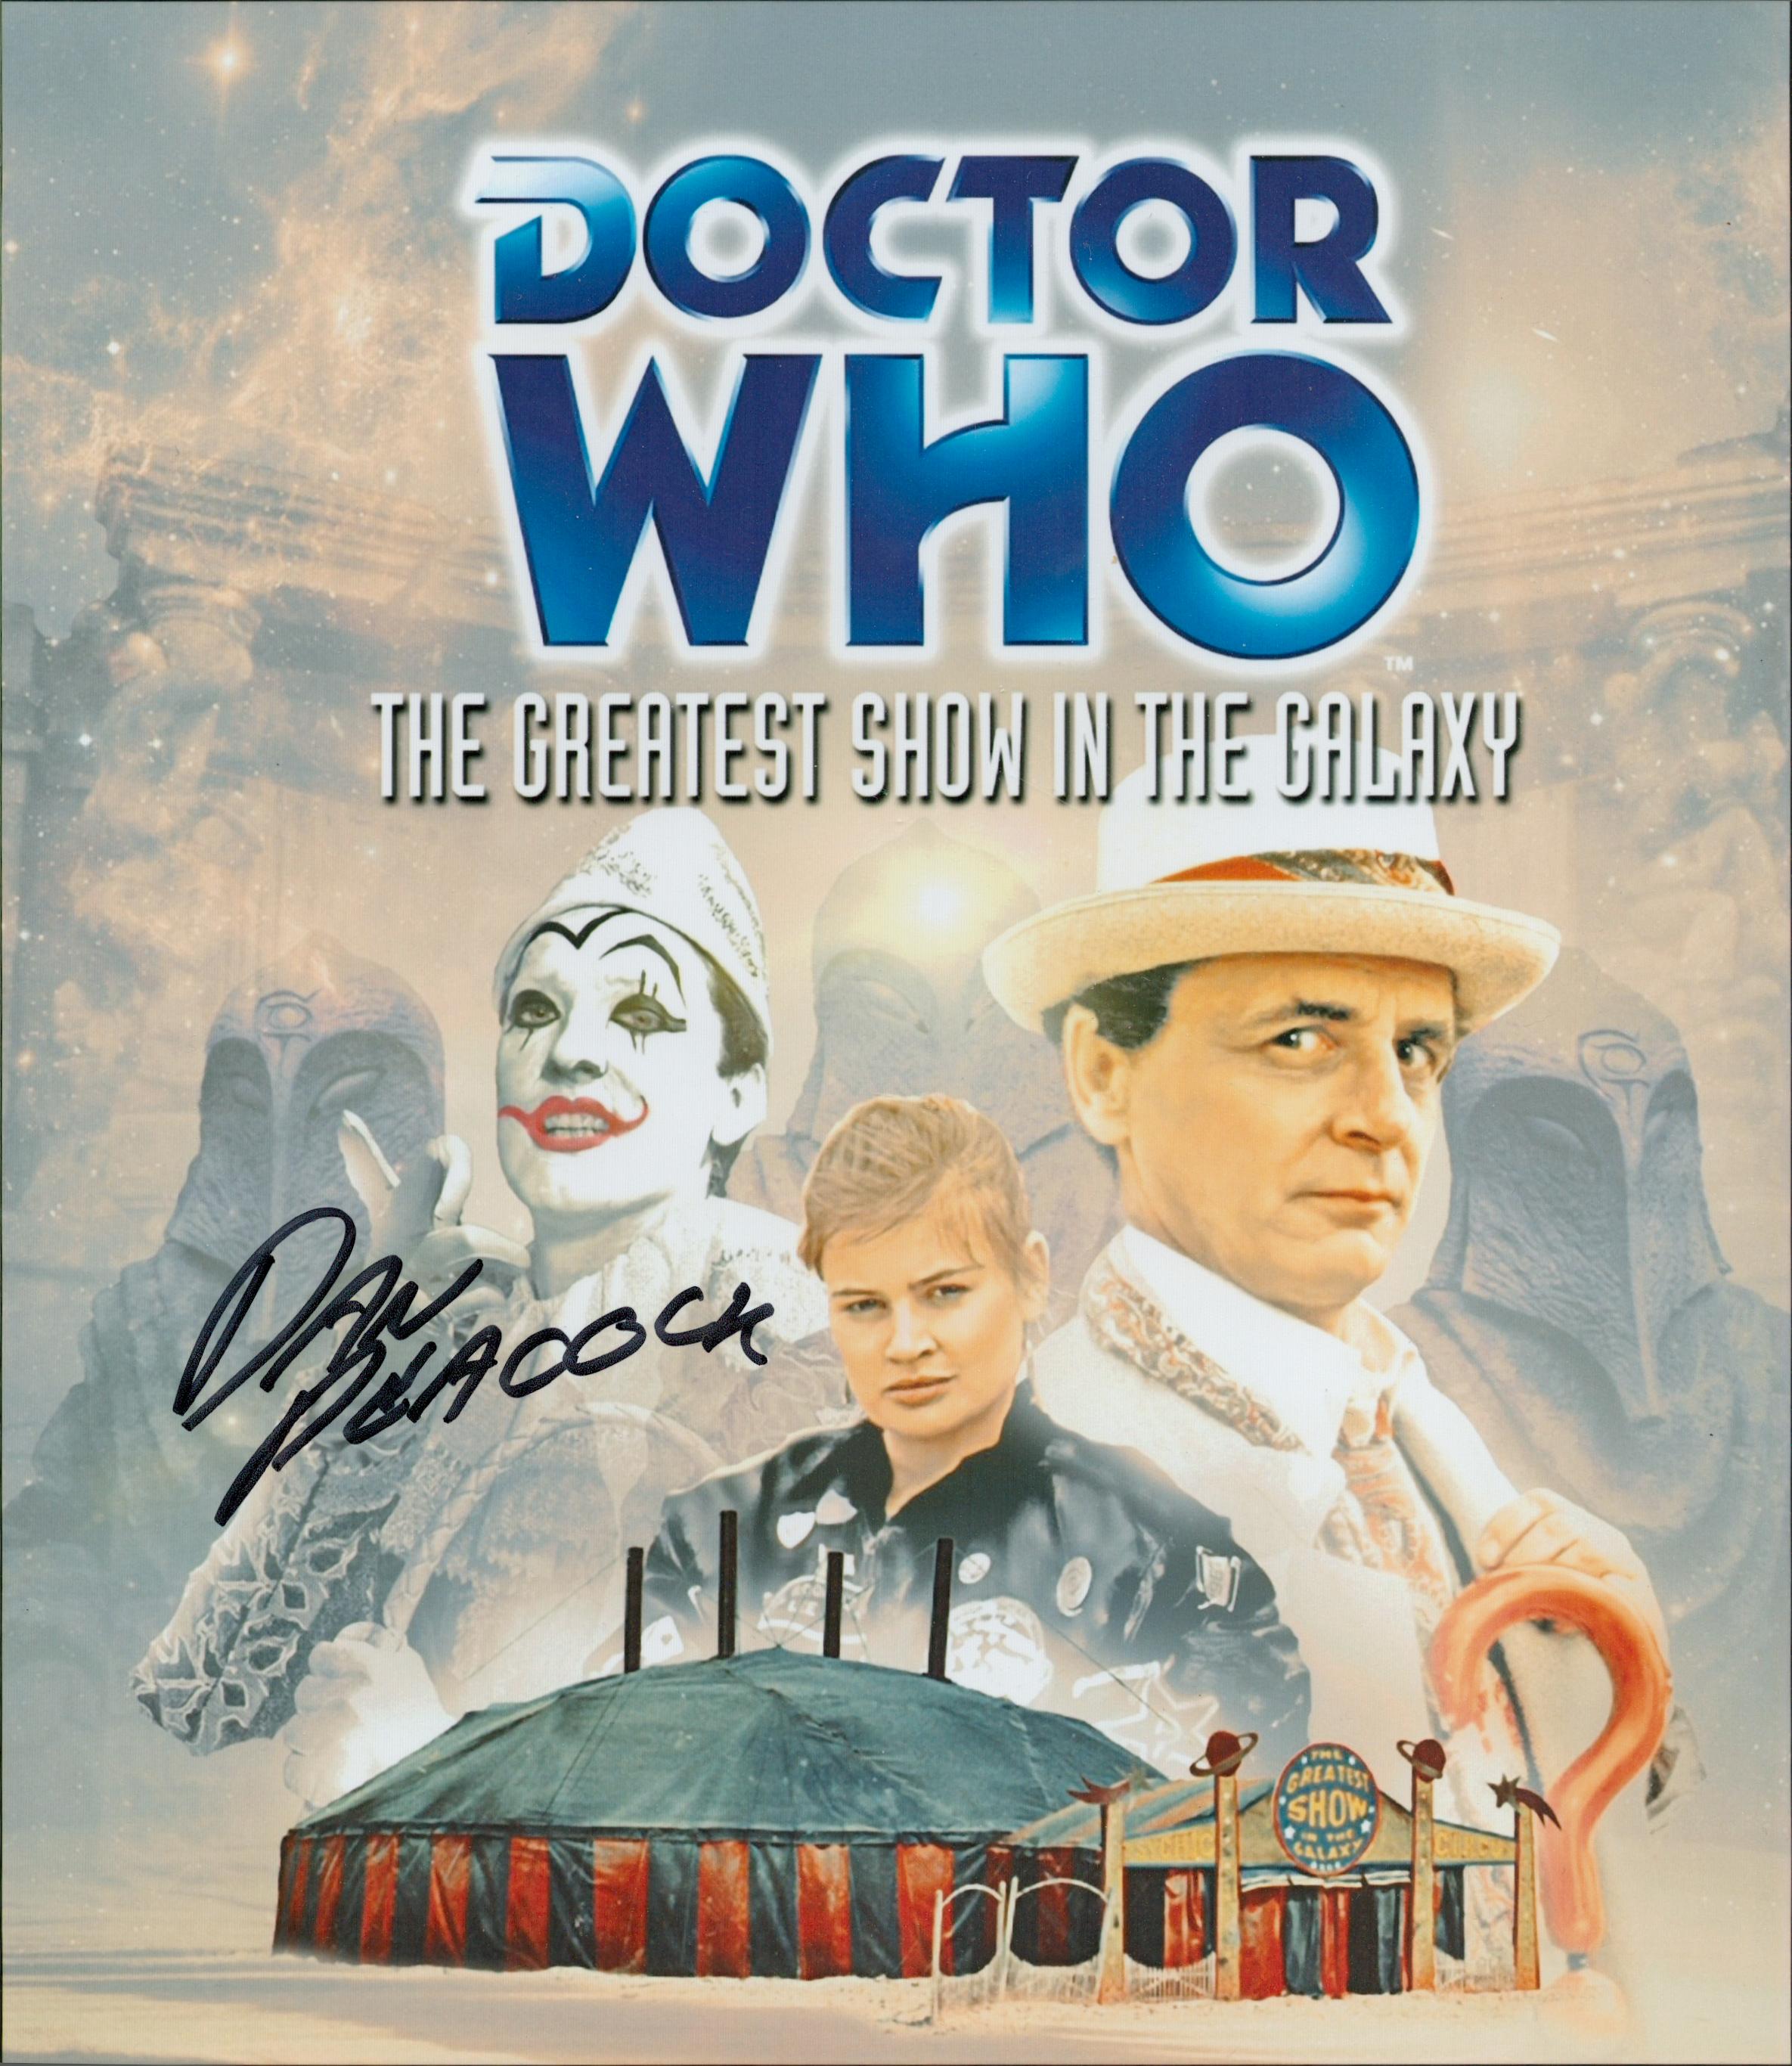 Dr Who actor Dan Peacock signed 10 x 8 inch colour scene photo. Good condition. All autographs are